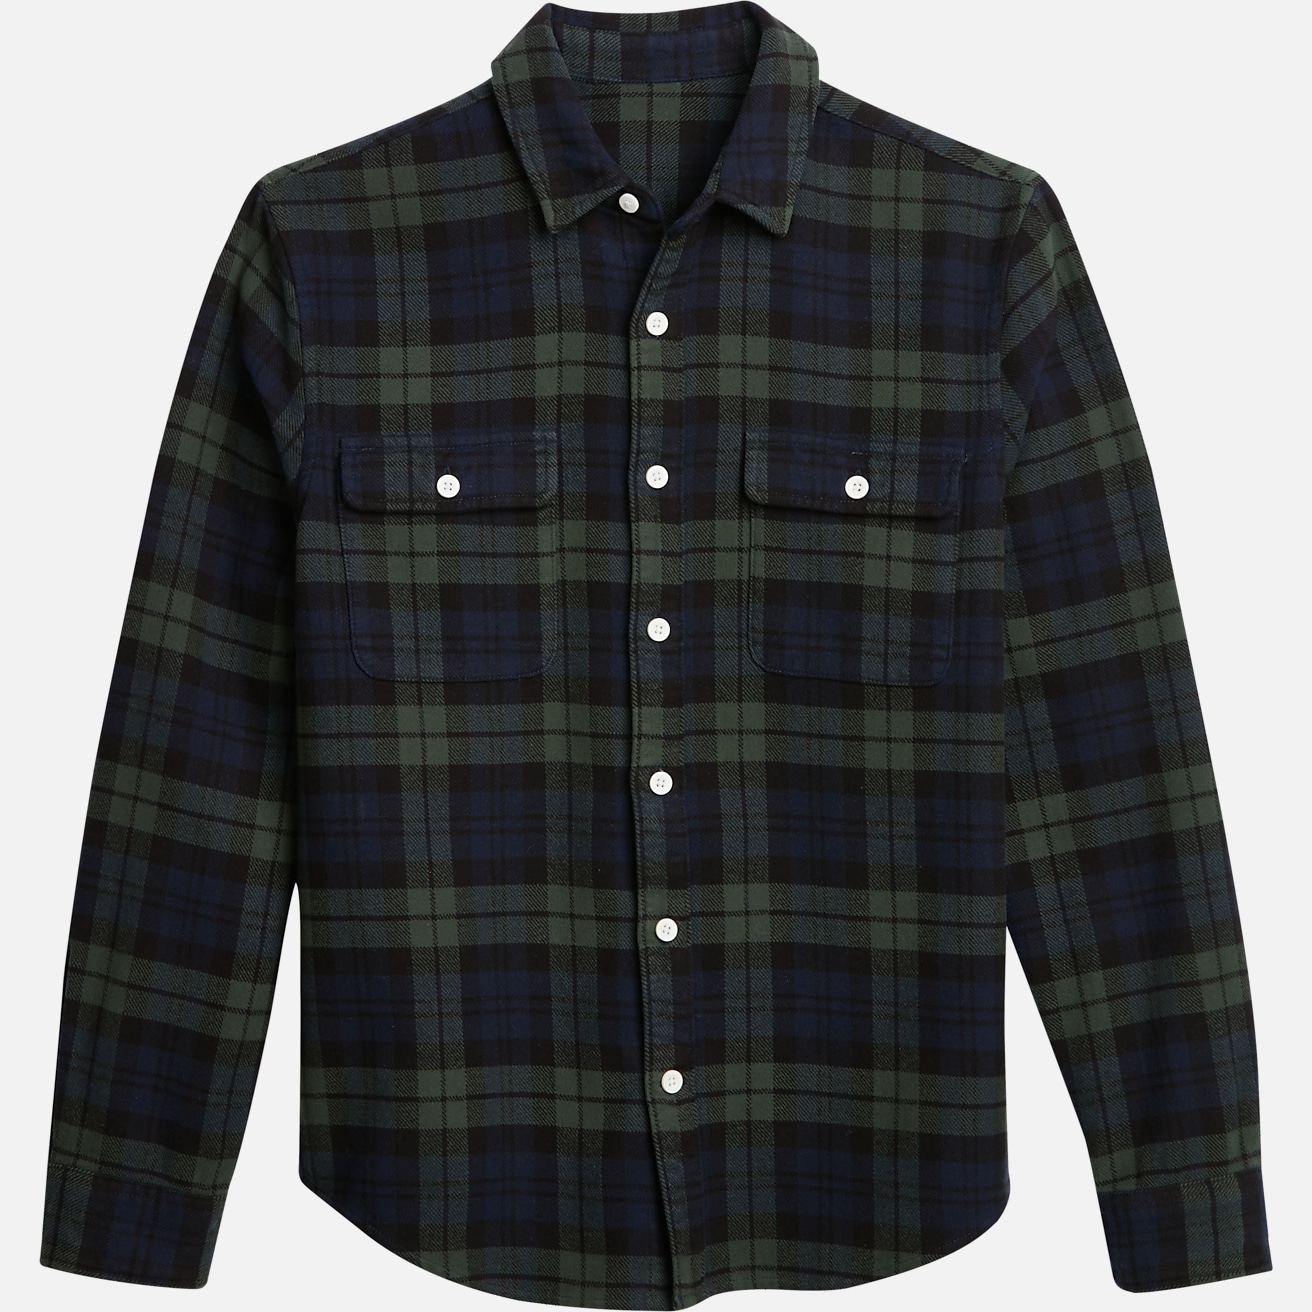 https://image.menswearhouse.com/is/image/TMW/TMW_6PUK_39_LUCKY_BRAND_SPORT_SHIRTS_NAVY_AND_OLIVE_MAIN?imPolicy=pdp-mob-2x